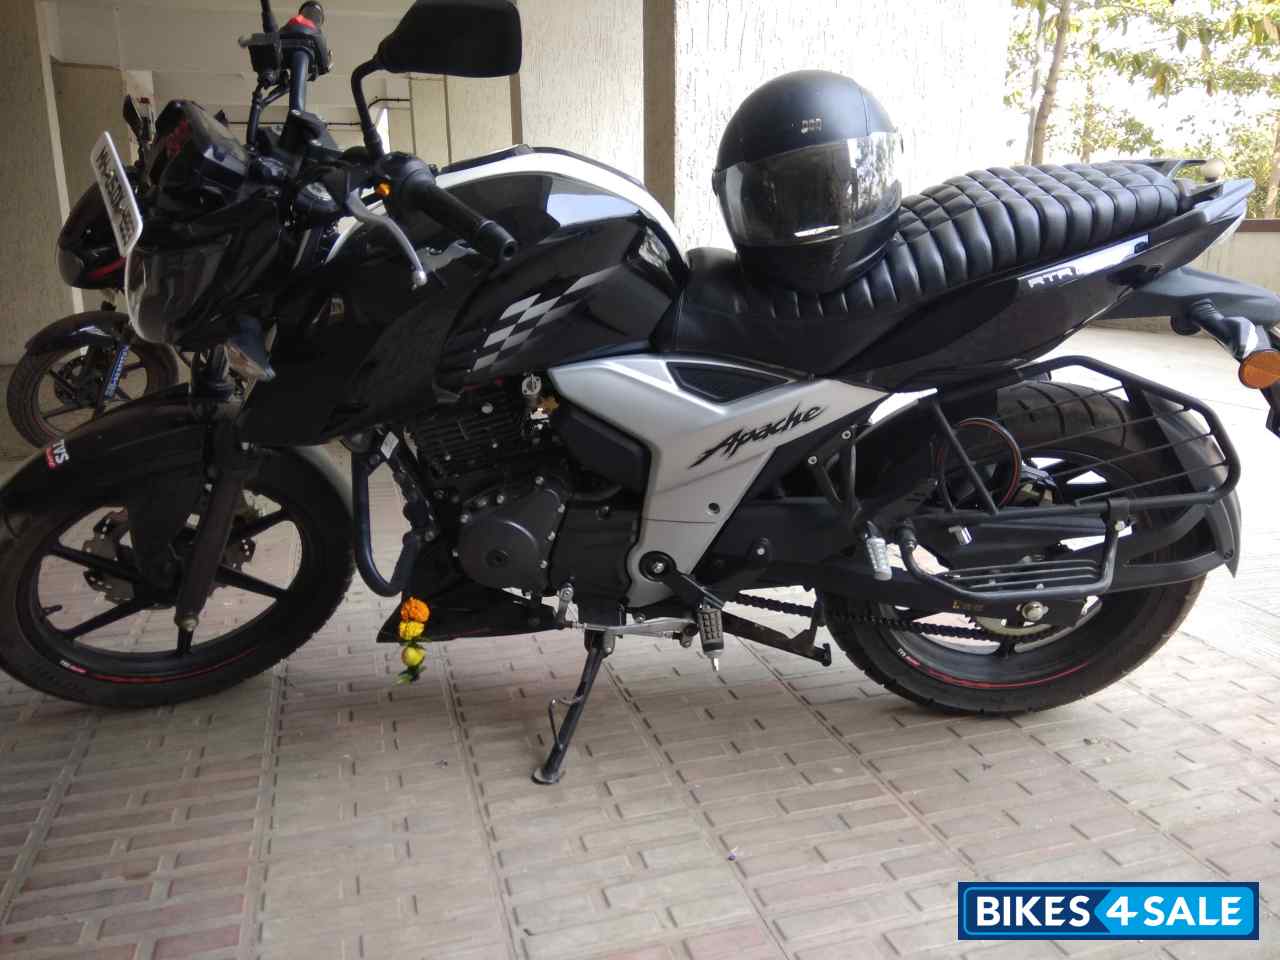 Used 2018 Model Tvs Apache Rtr 160 4v For Sale In Thane Id 211428